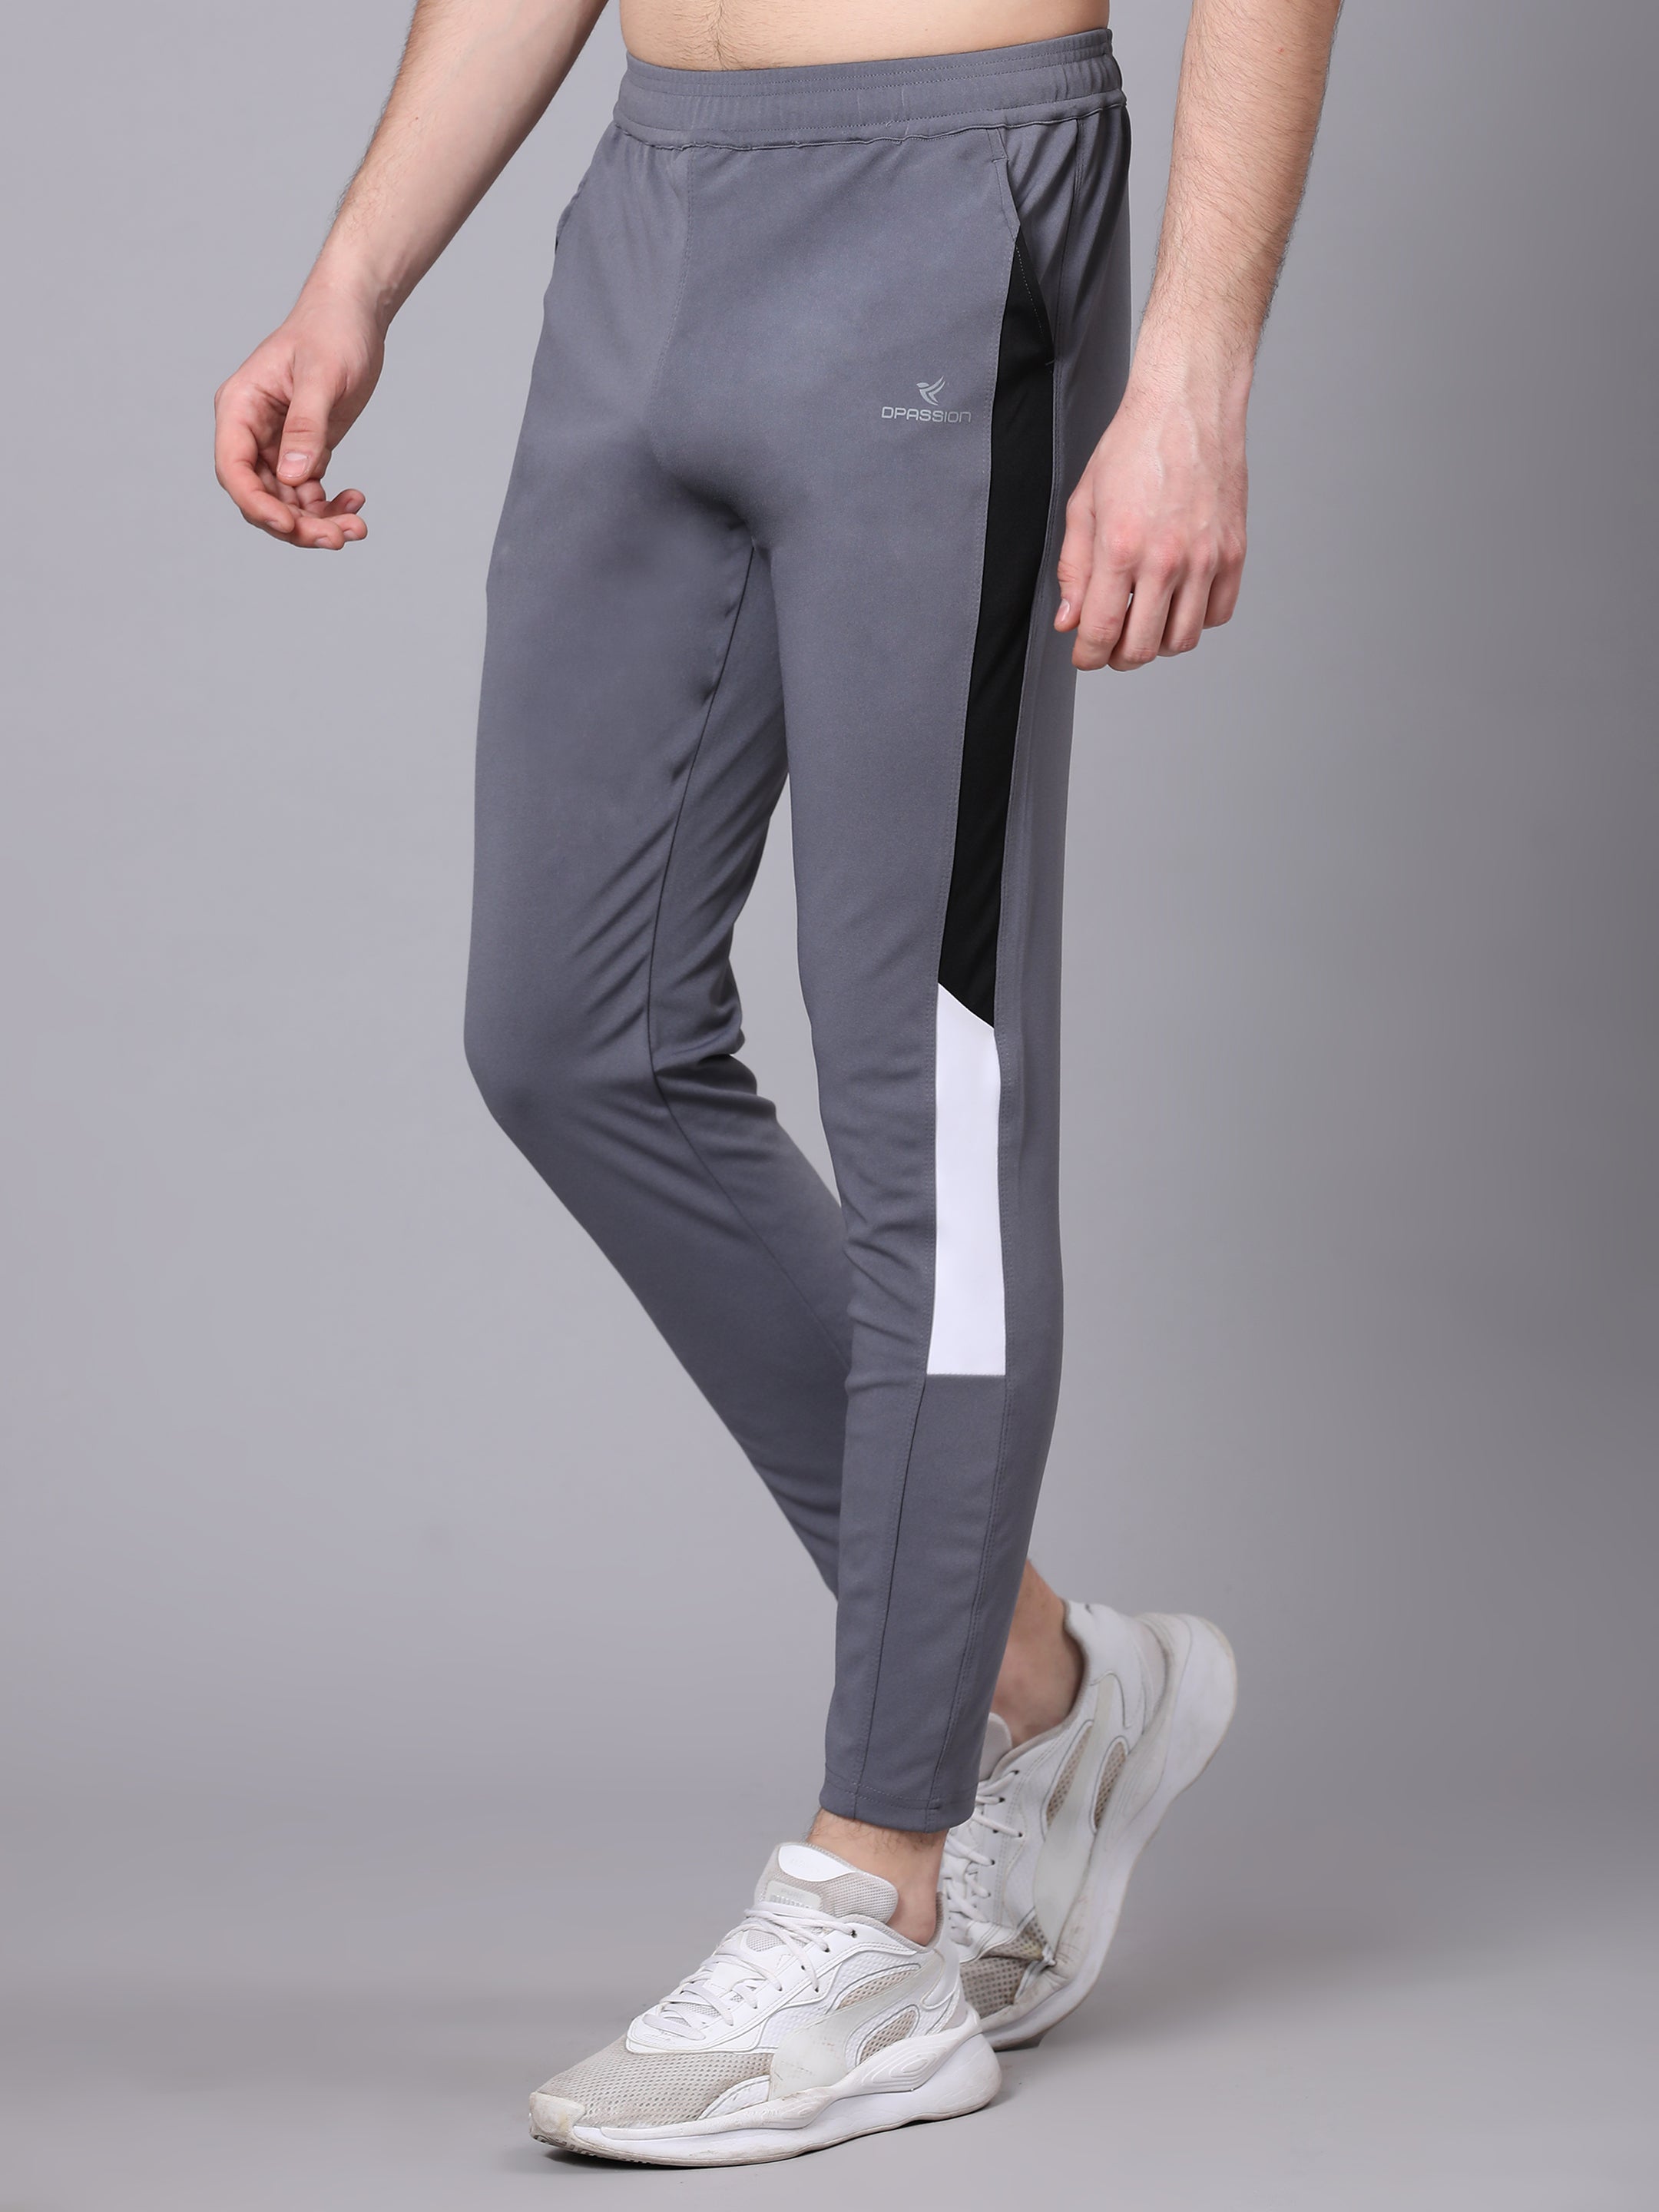 Buy Dpassion ns Lycra Regular fit Track Pant for Sports